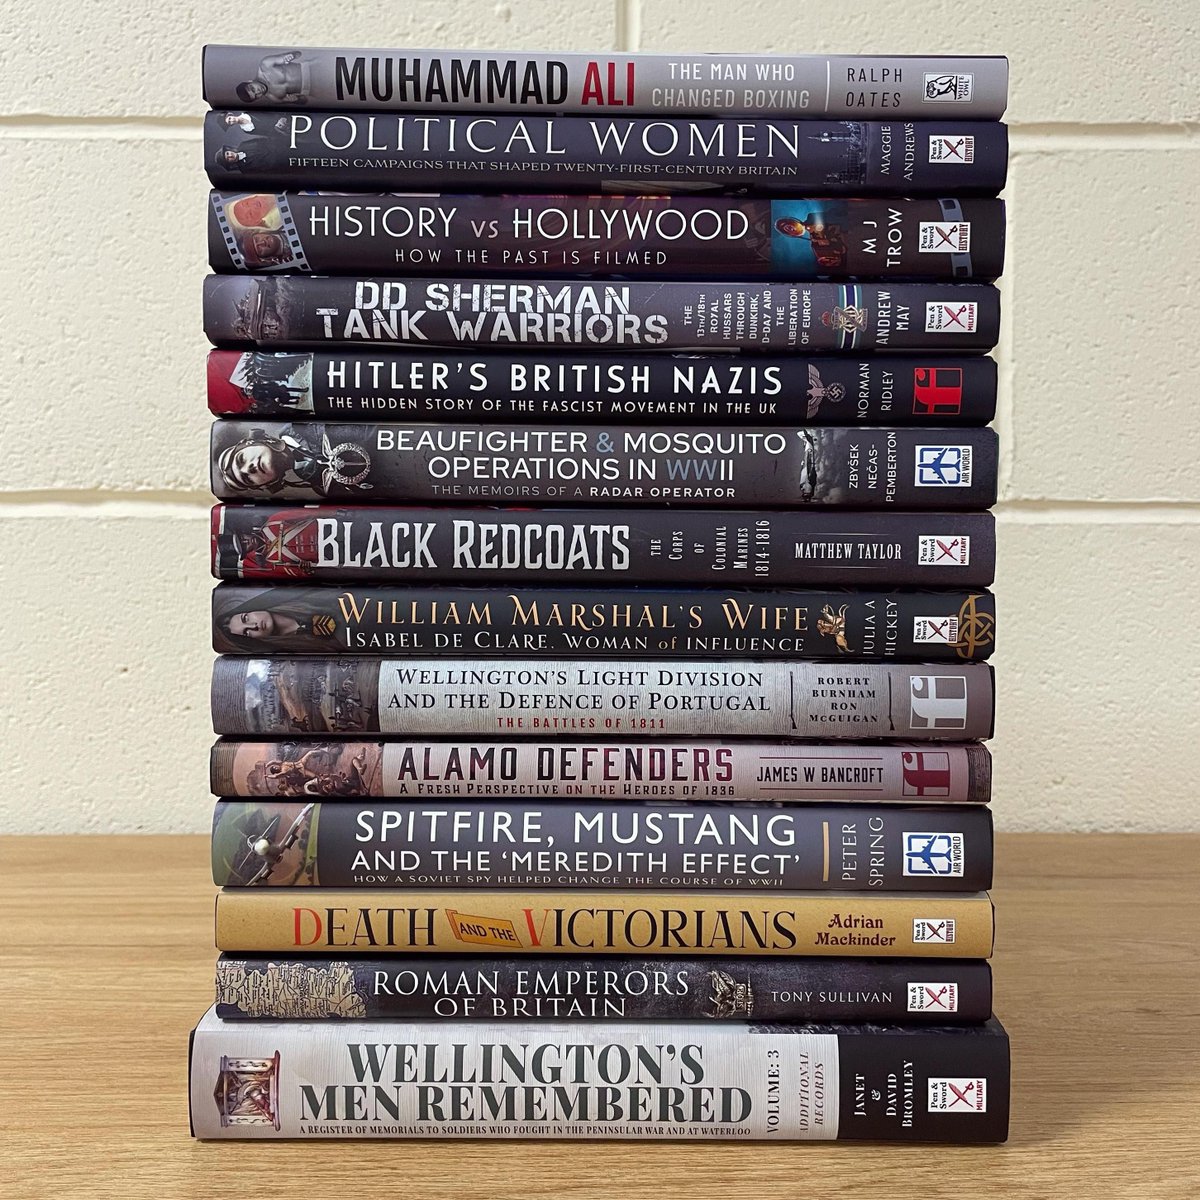 Hello new books 😍 Feast your eyes on this tempting selection of new (and some very soon to be released) titles 📚✨ Which one would you read first?